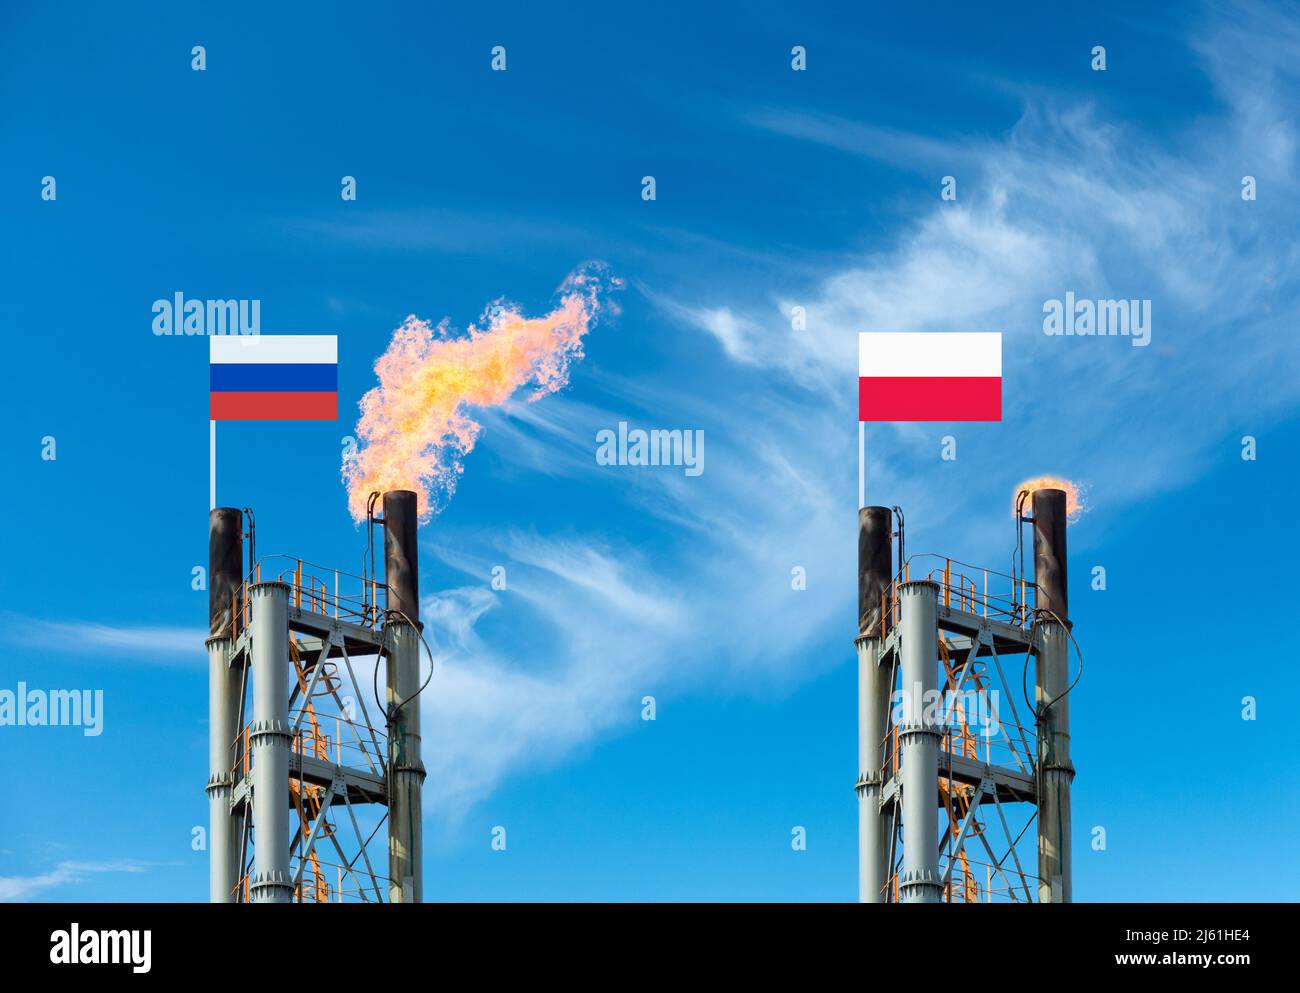 Russia cutting off gas supply to Poland concept. flags of Russia and Poland on gas refinery chimneys. Russia Ukraine war, conflict. Russian gas EU... Stock Photo